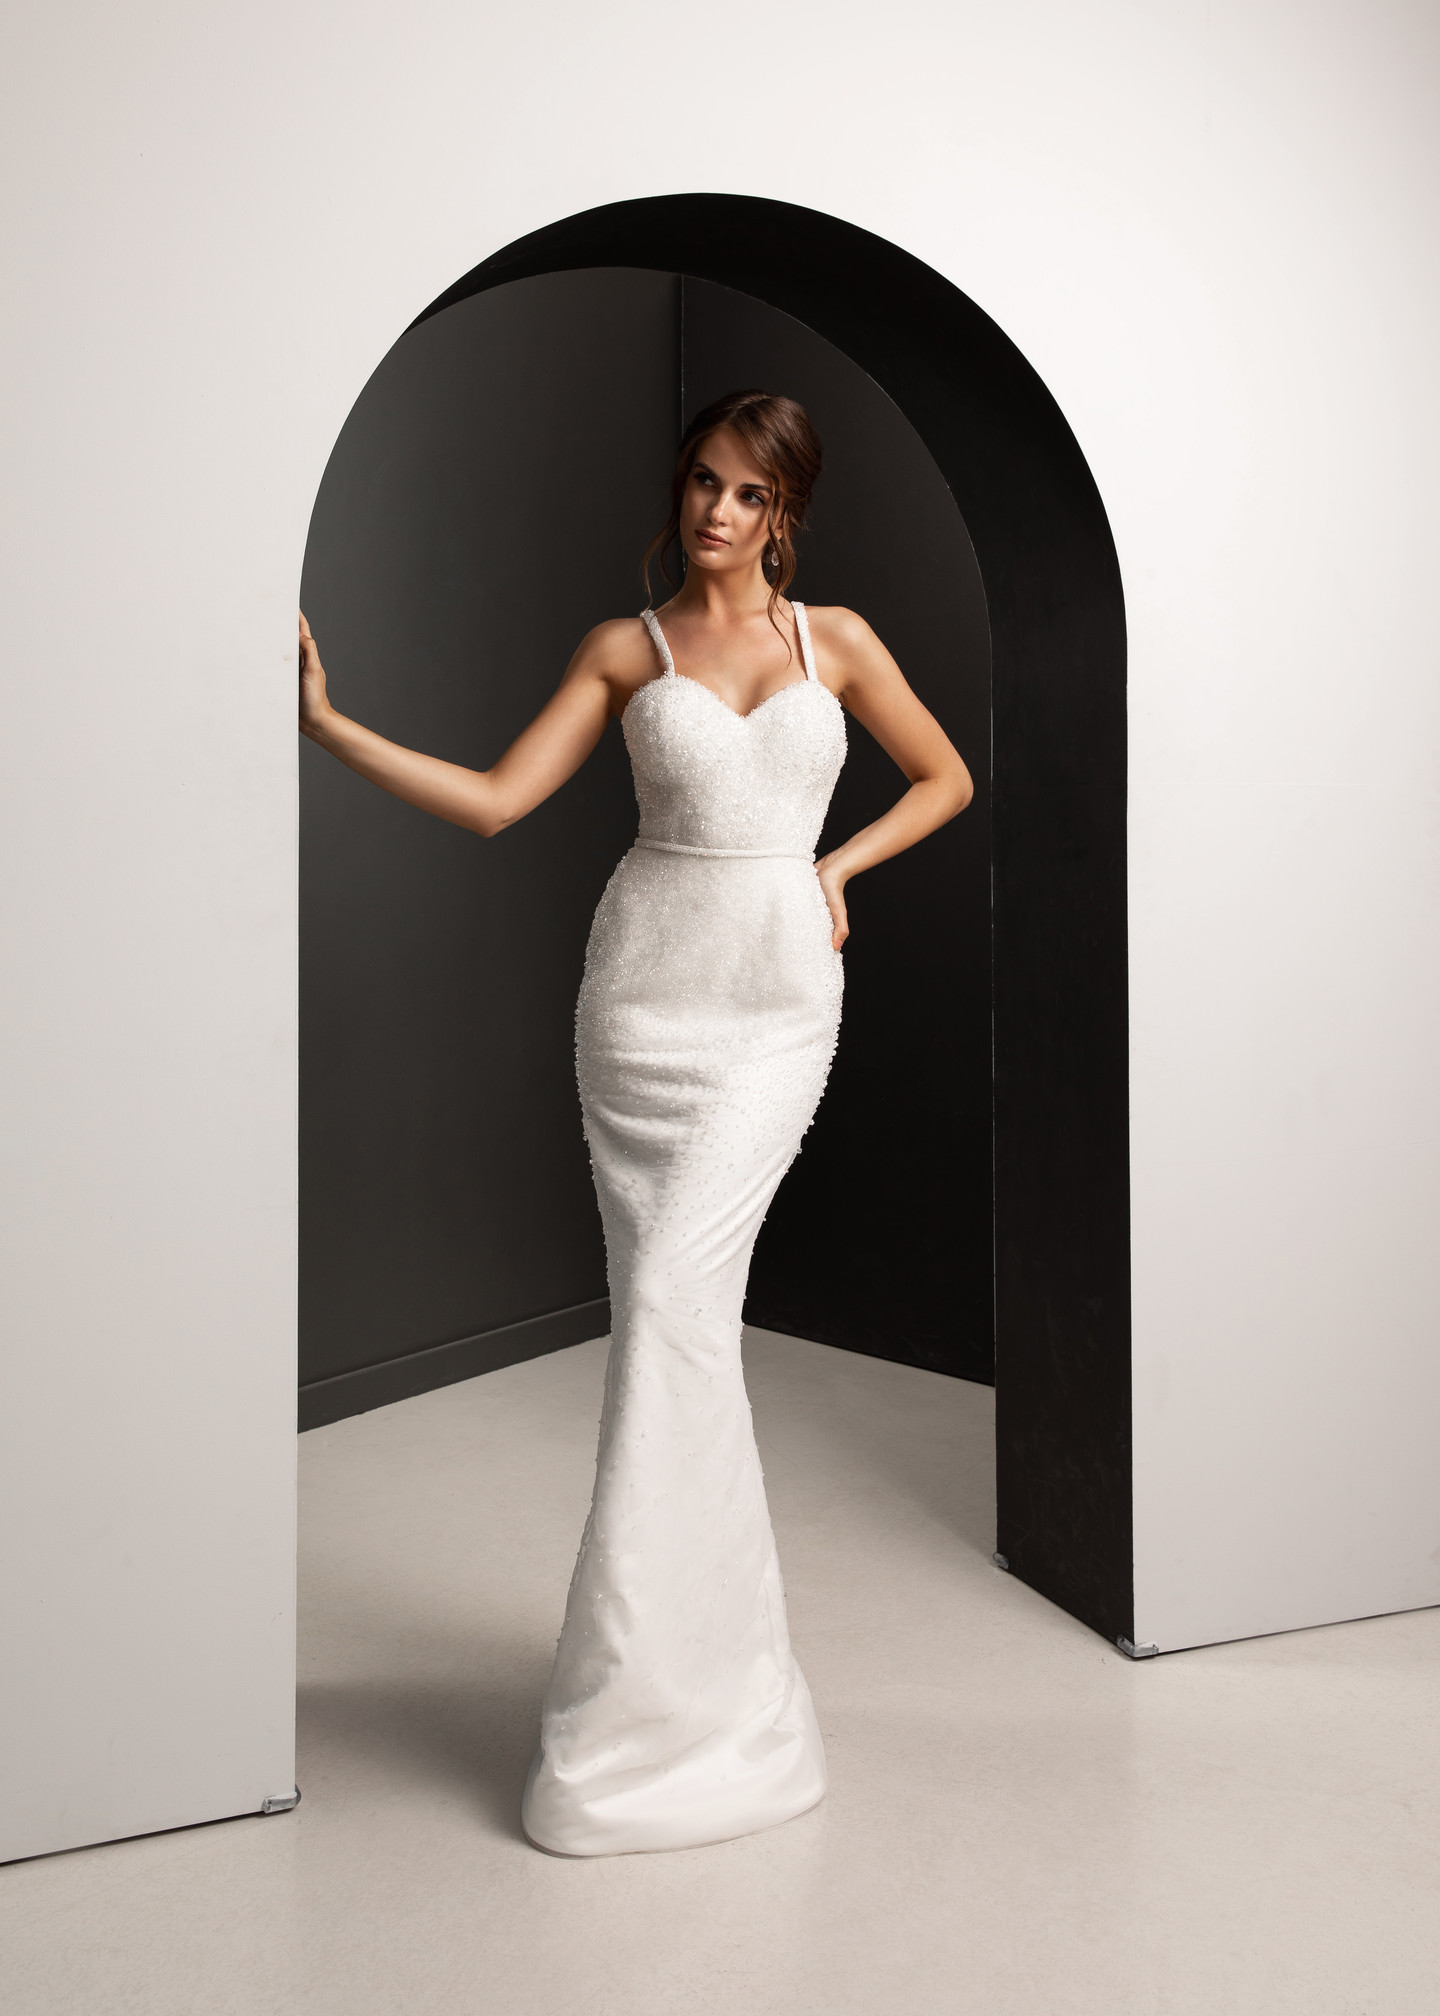 Dominica dress, 2021, couture, dress, bridal, off-white, embroidery, sheath silhouette